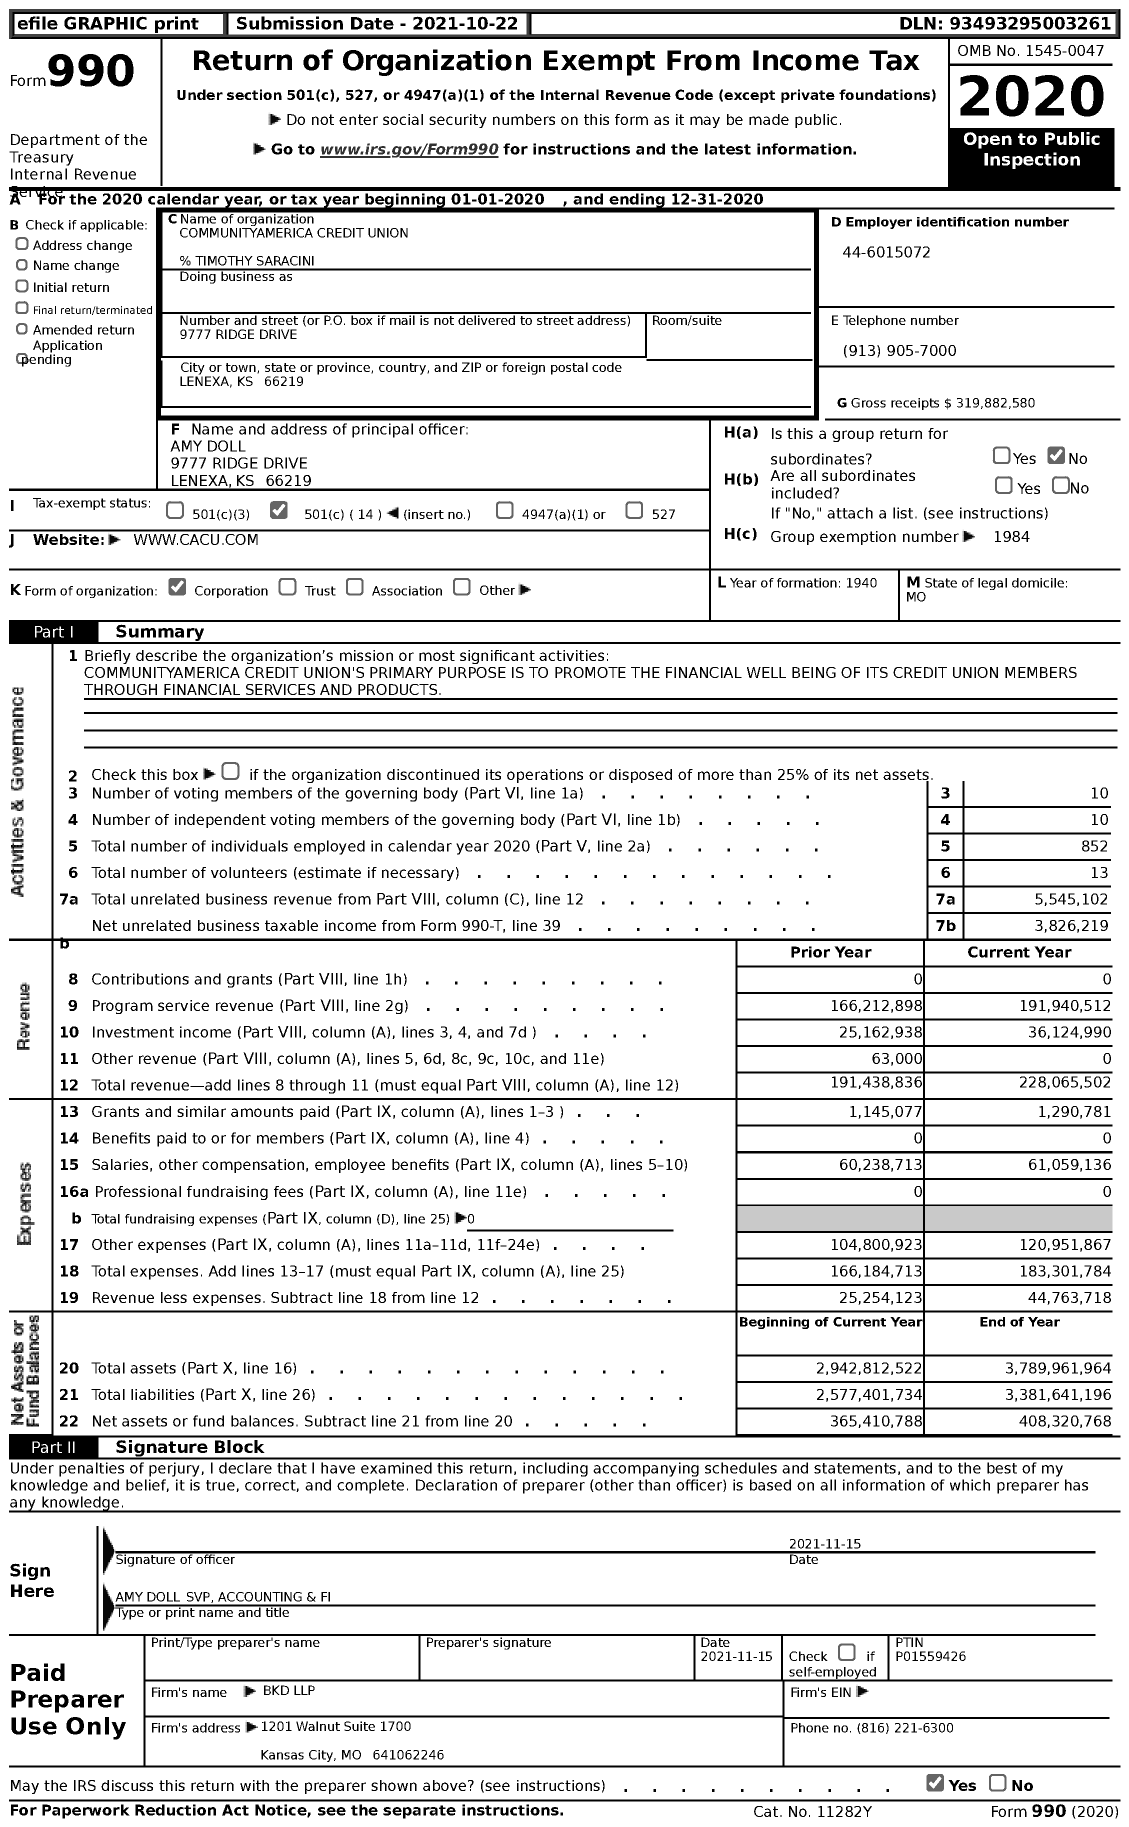 Image of first page of 2020 Form 990 for Communityamerica Credit Union